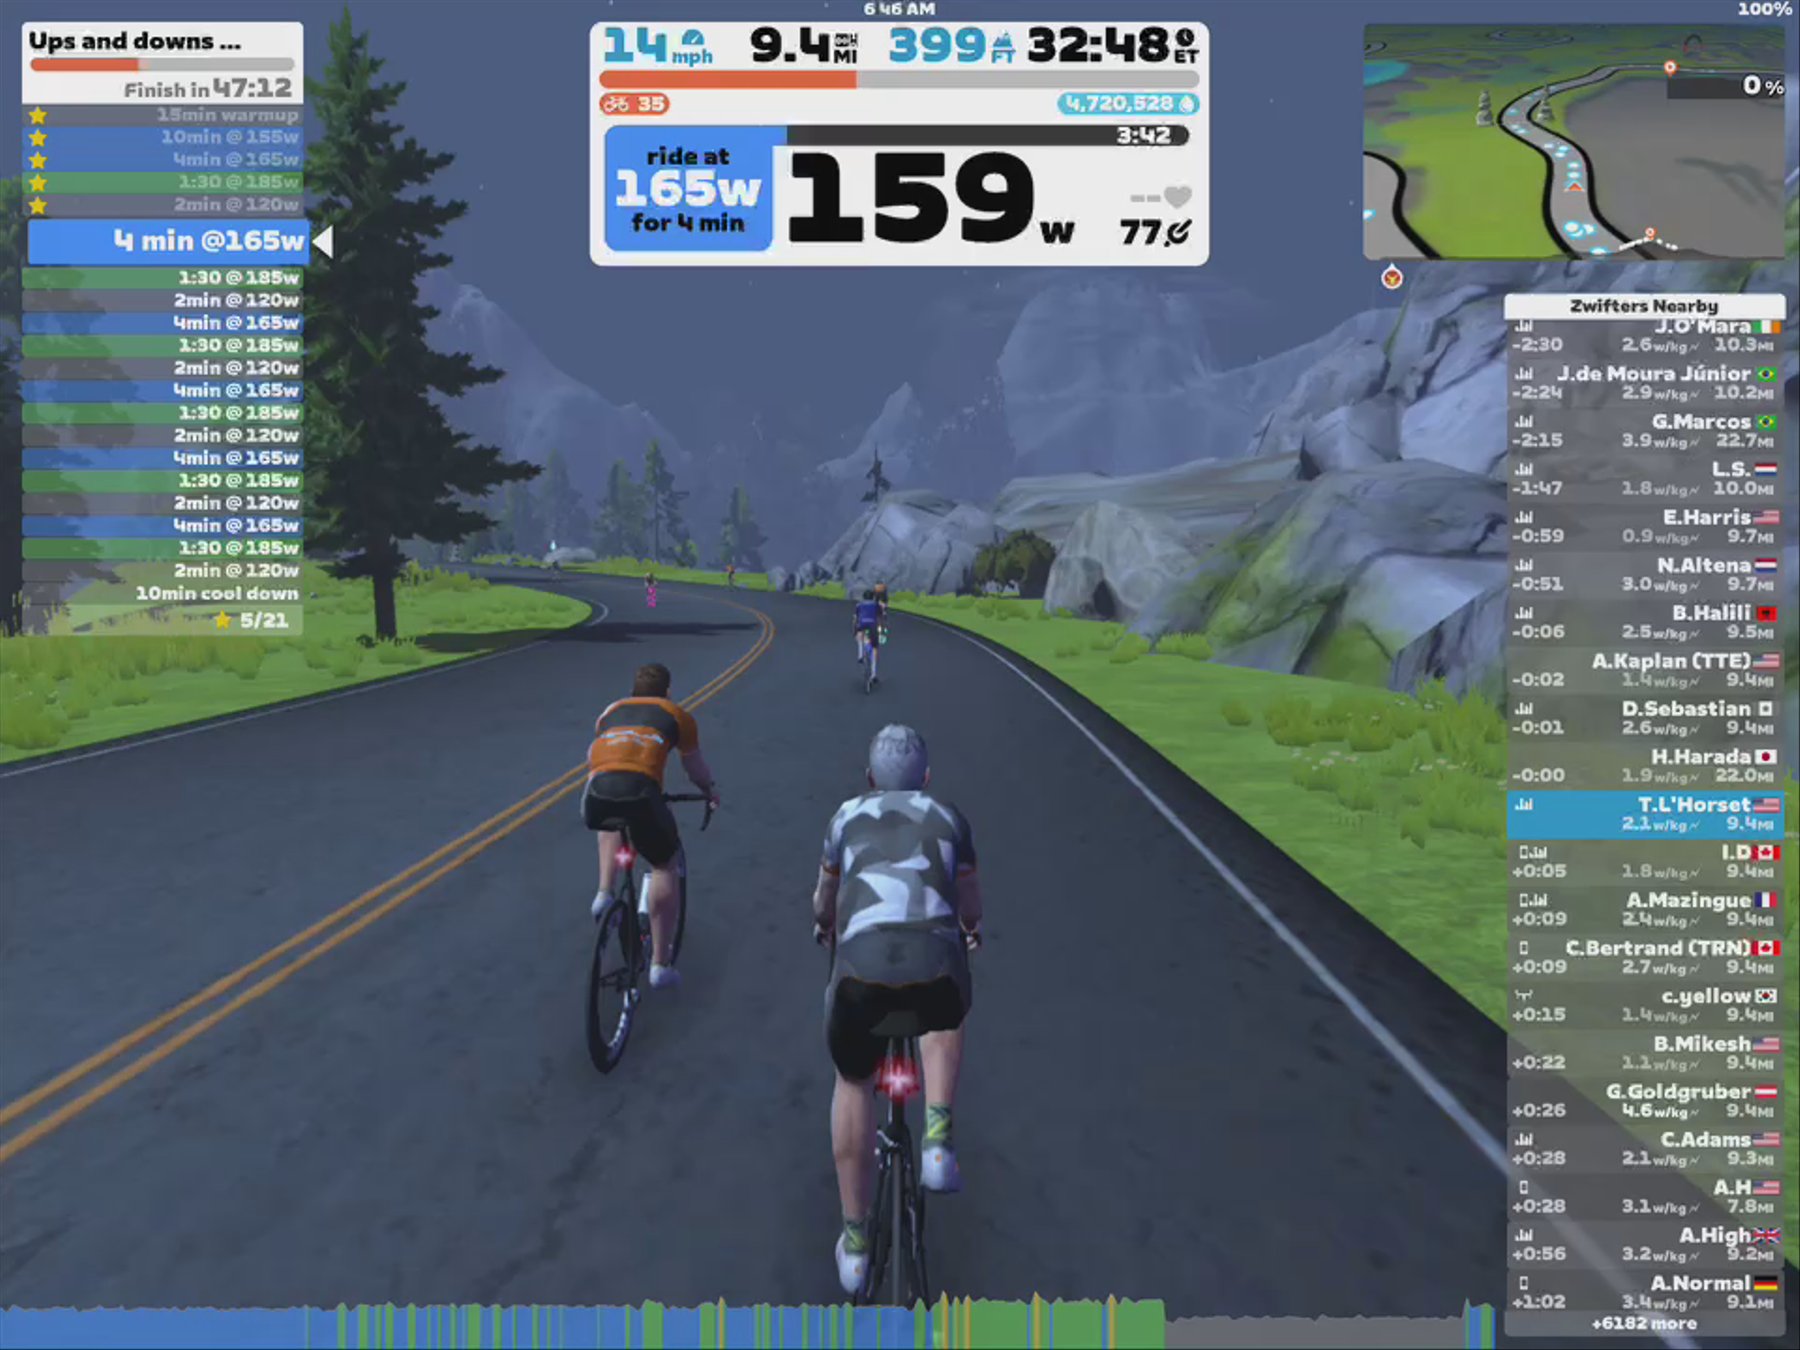 Zwift - Ups and downs aerobic cadence 2 in Watopia